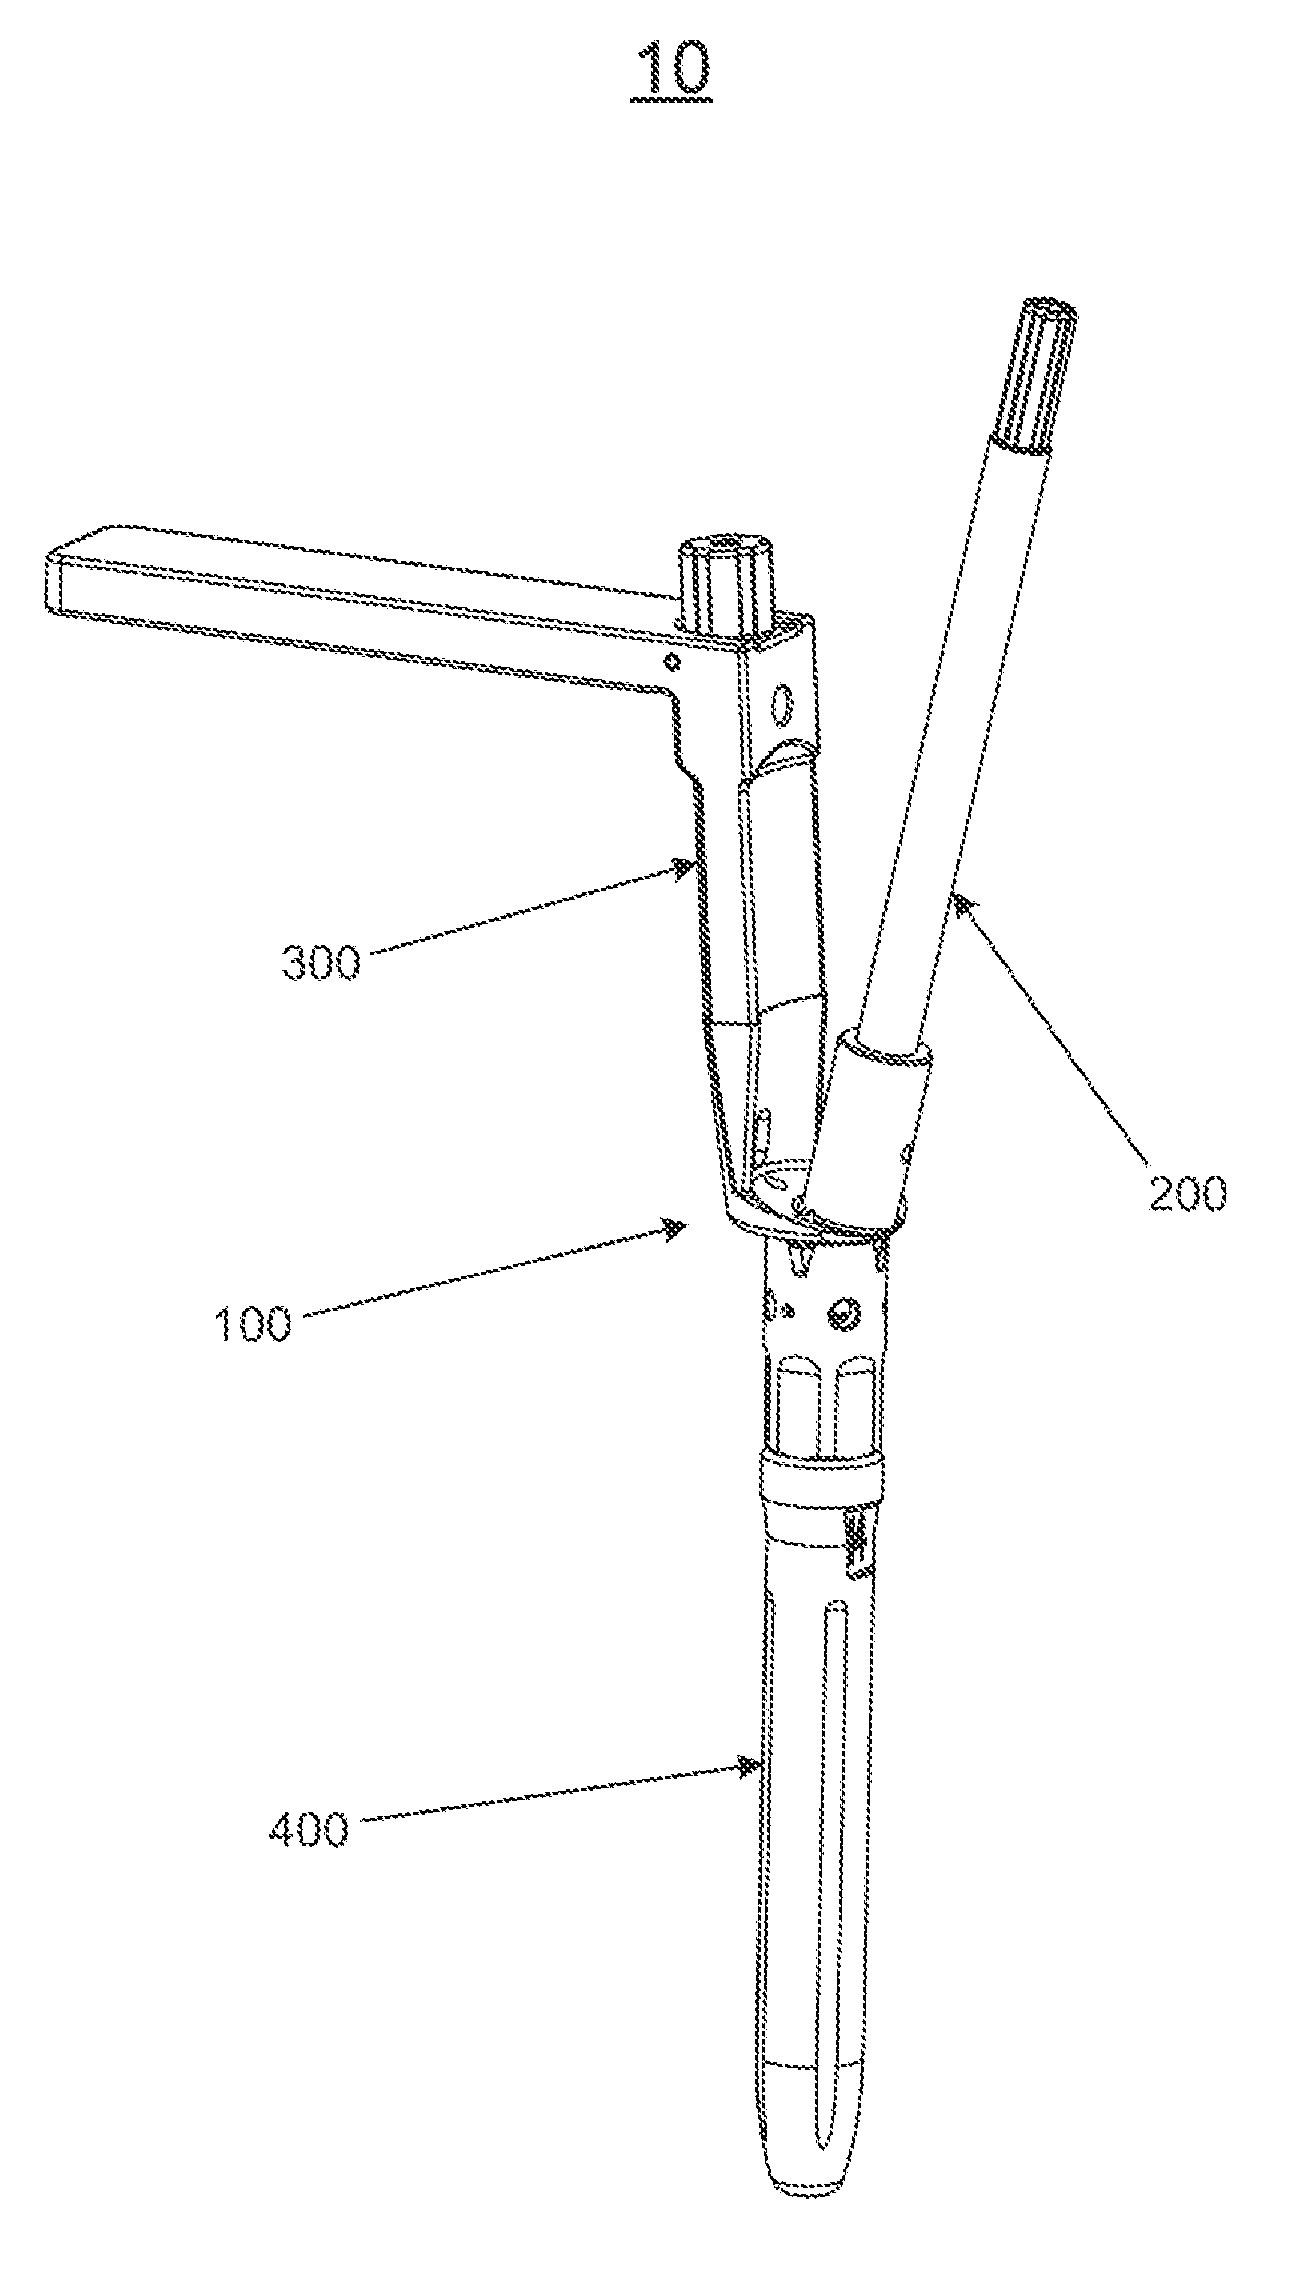 Surgical reaming instrument for shaping a bone cavity